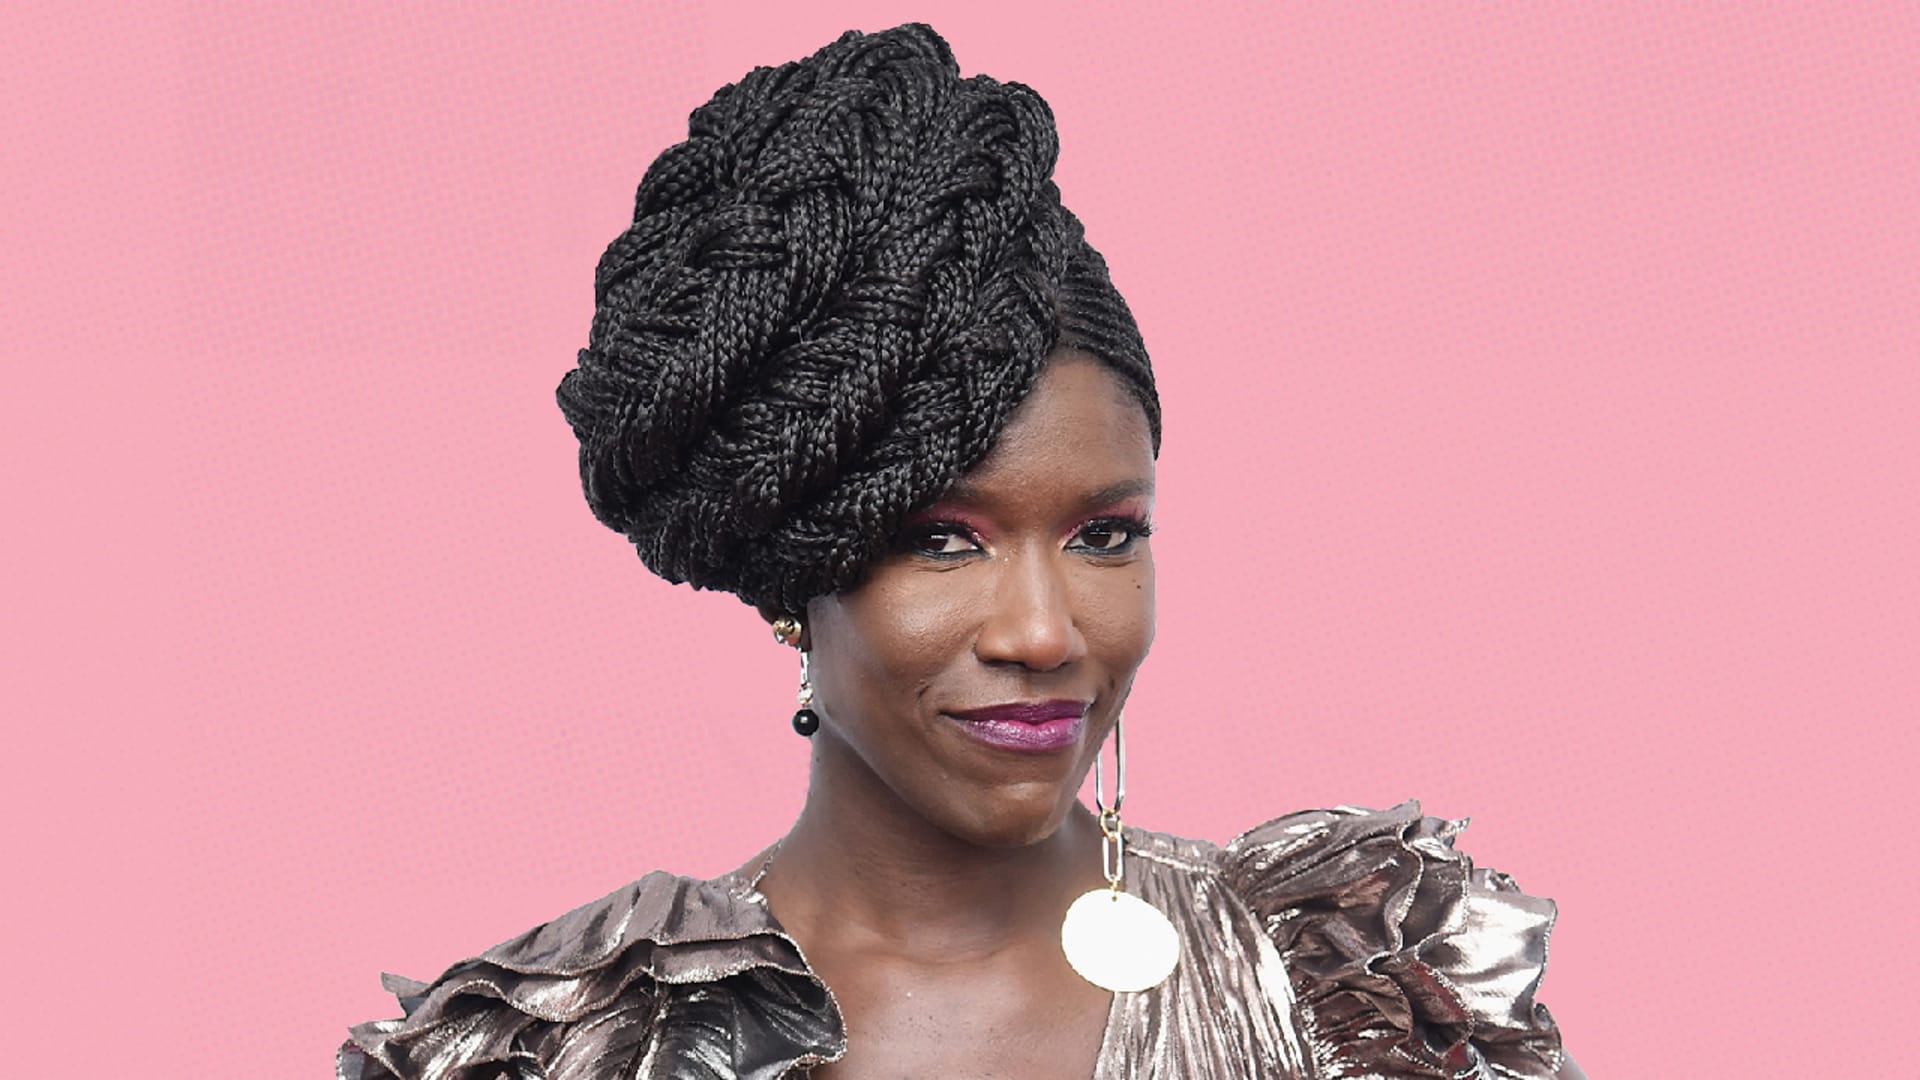 He told Bozoma Saint John to work for Uber. “Of course, I hung up on him.”